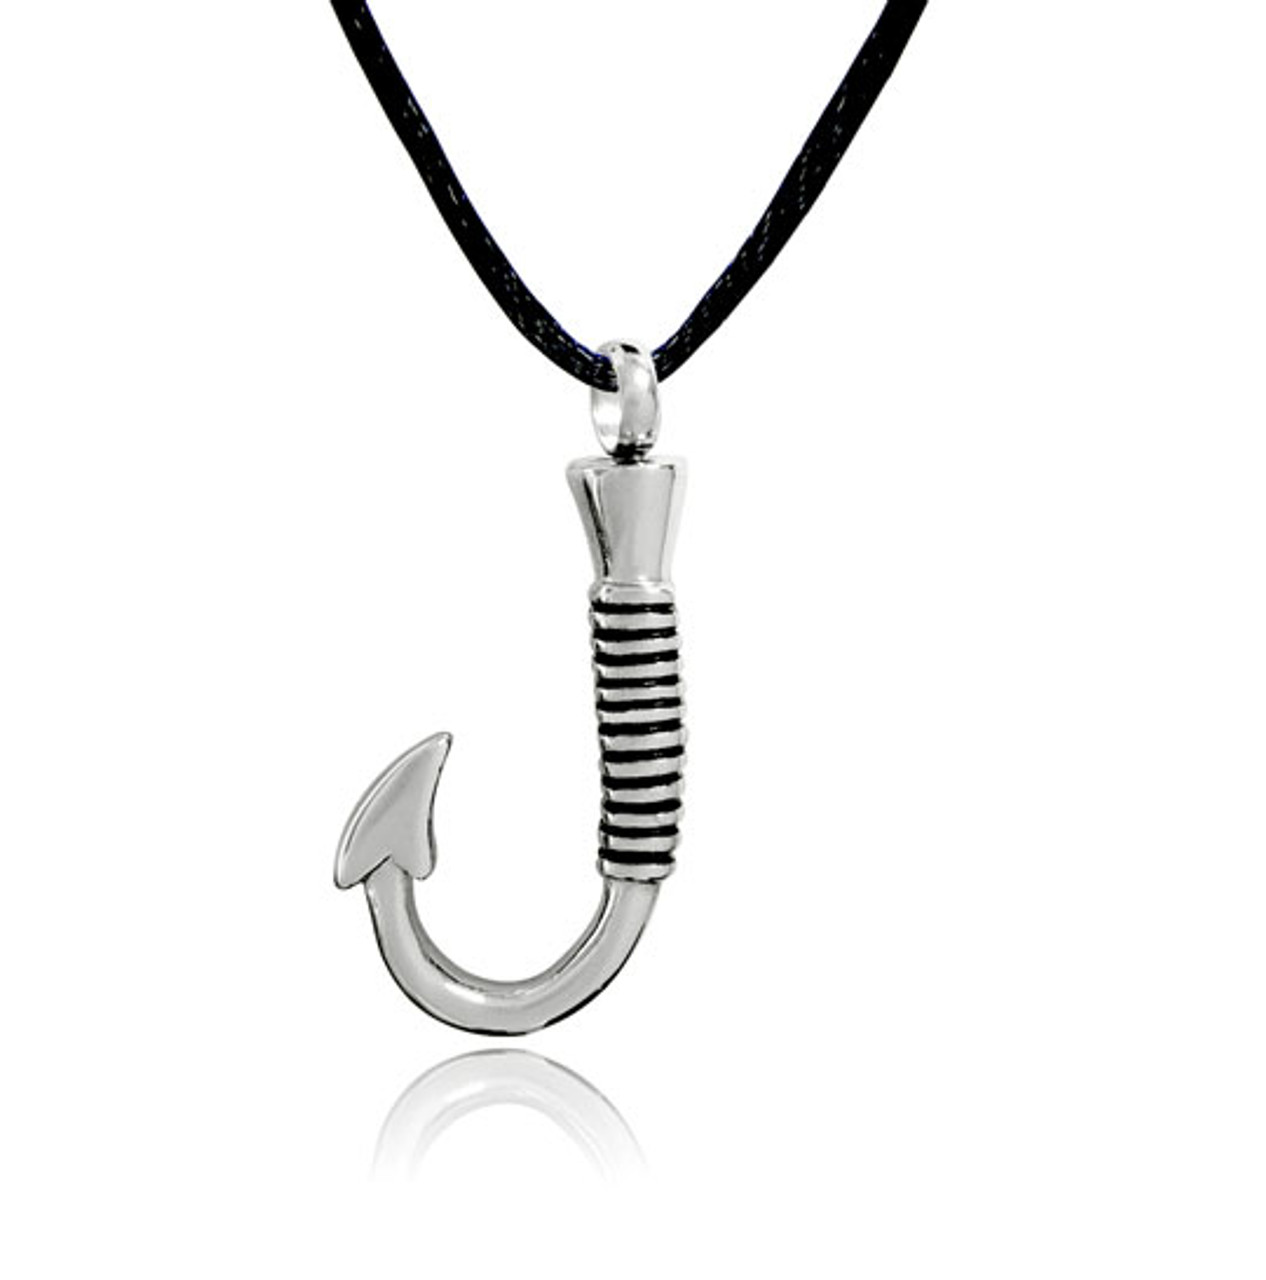 https://cdn11.bigcommerce.com/s-lq6s7zbxc7/images/stencil/1280x1280/products/27406/119475/fishing-hook-stainless-steel-cremation-jewelry-pendant-necklace-20__88280.1701705826.jpg?c=1?imbypass=on